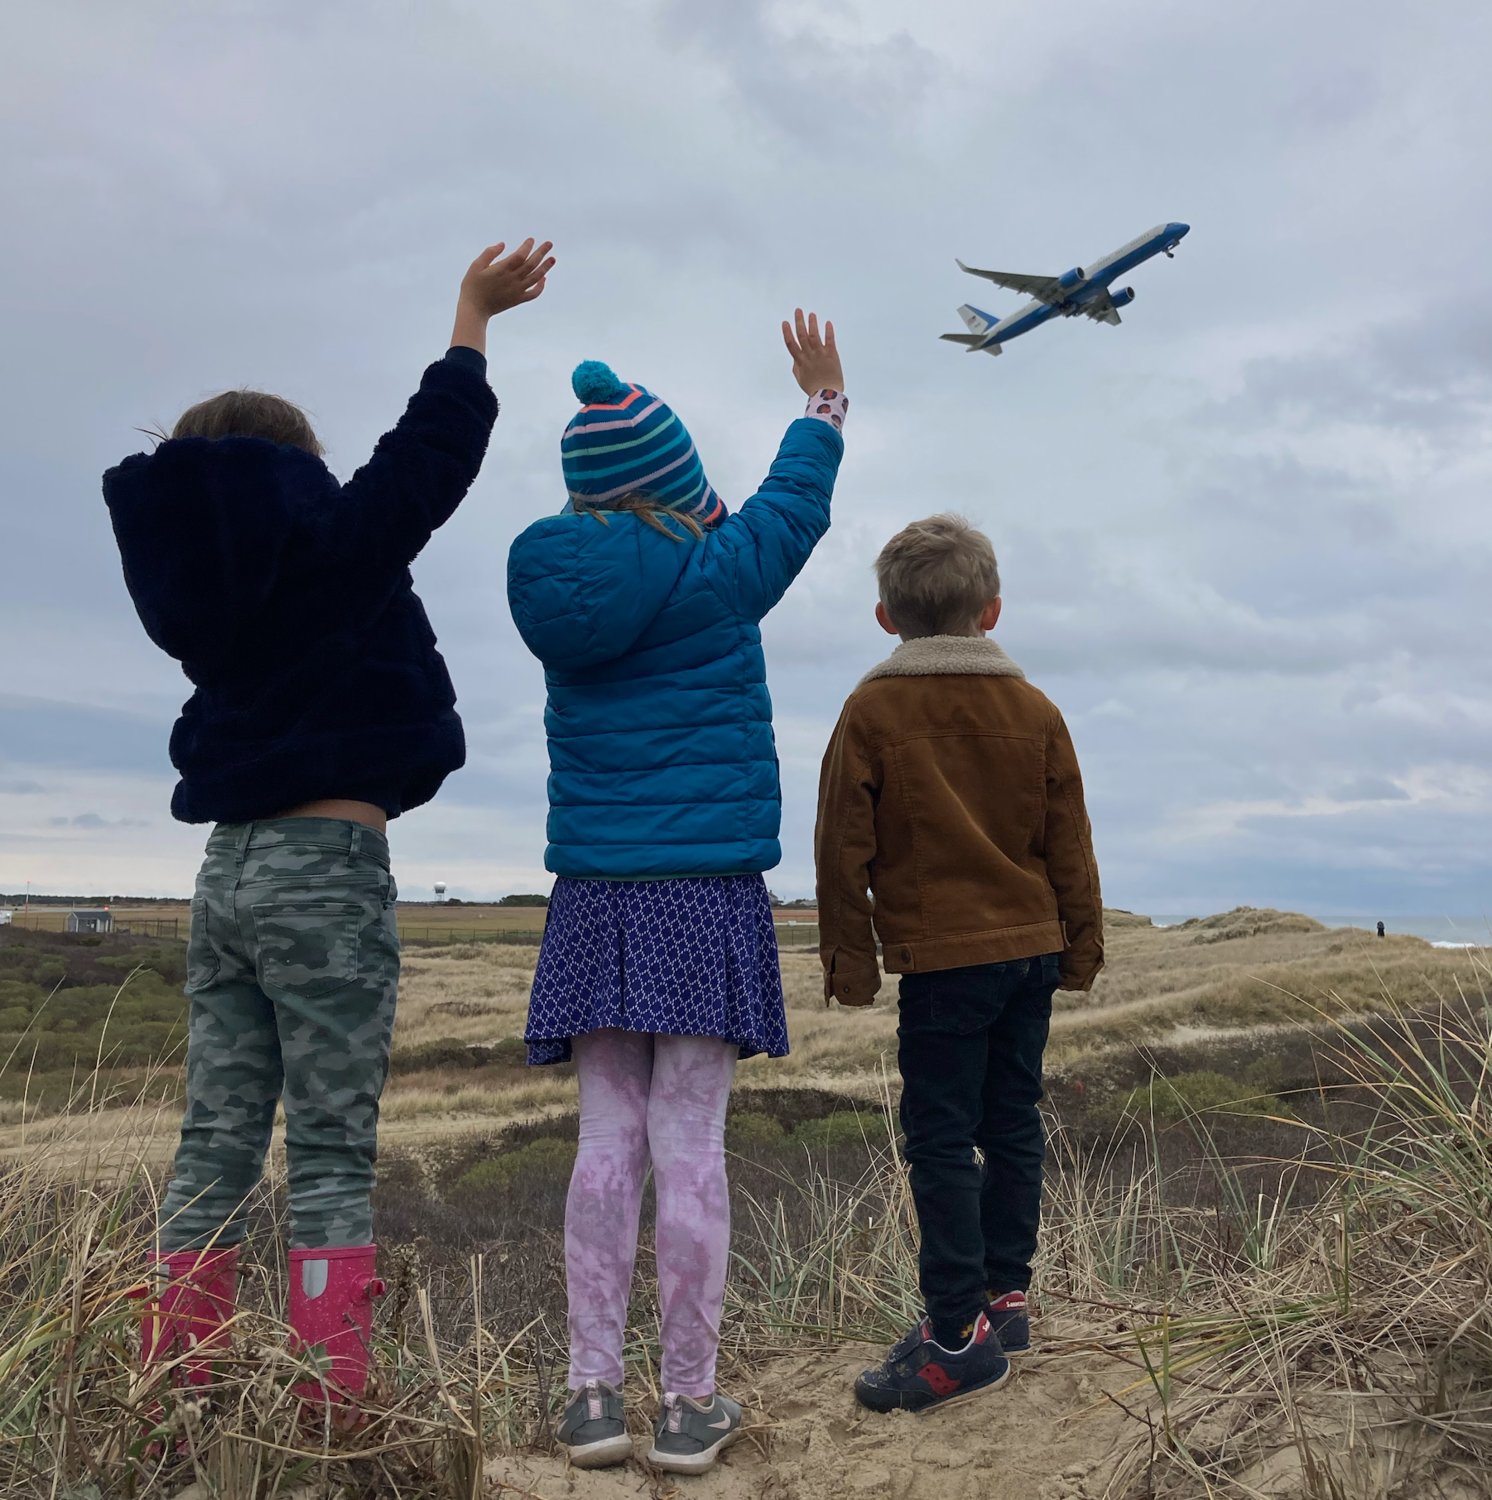 Waving goodbye to Air Force One as the Biden family departs for Washington, D.C. after their Thanksgiving week stay on Nantucket.